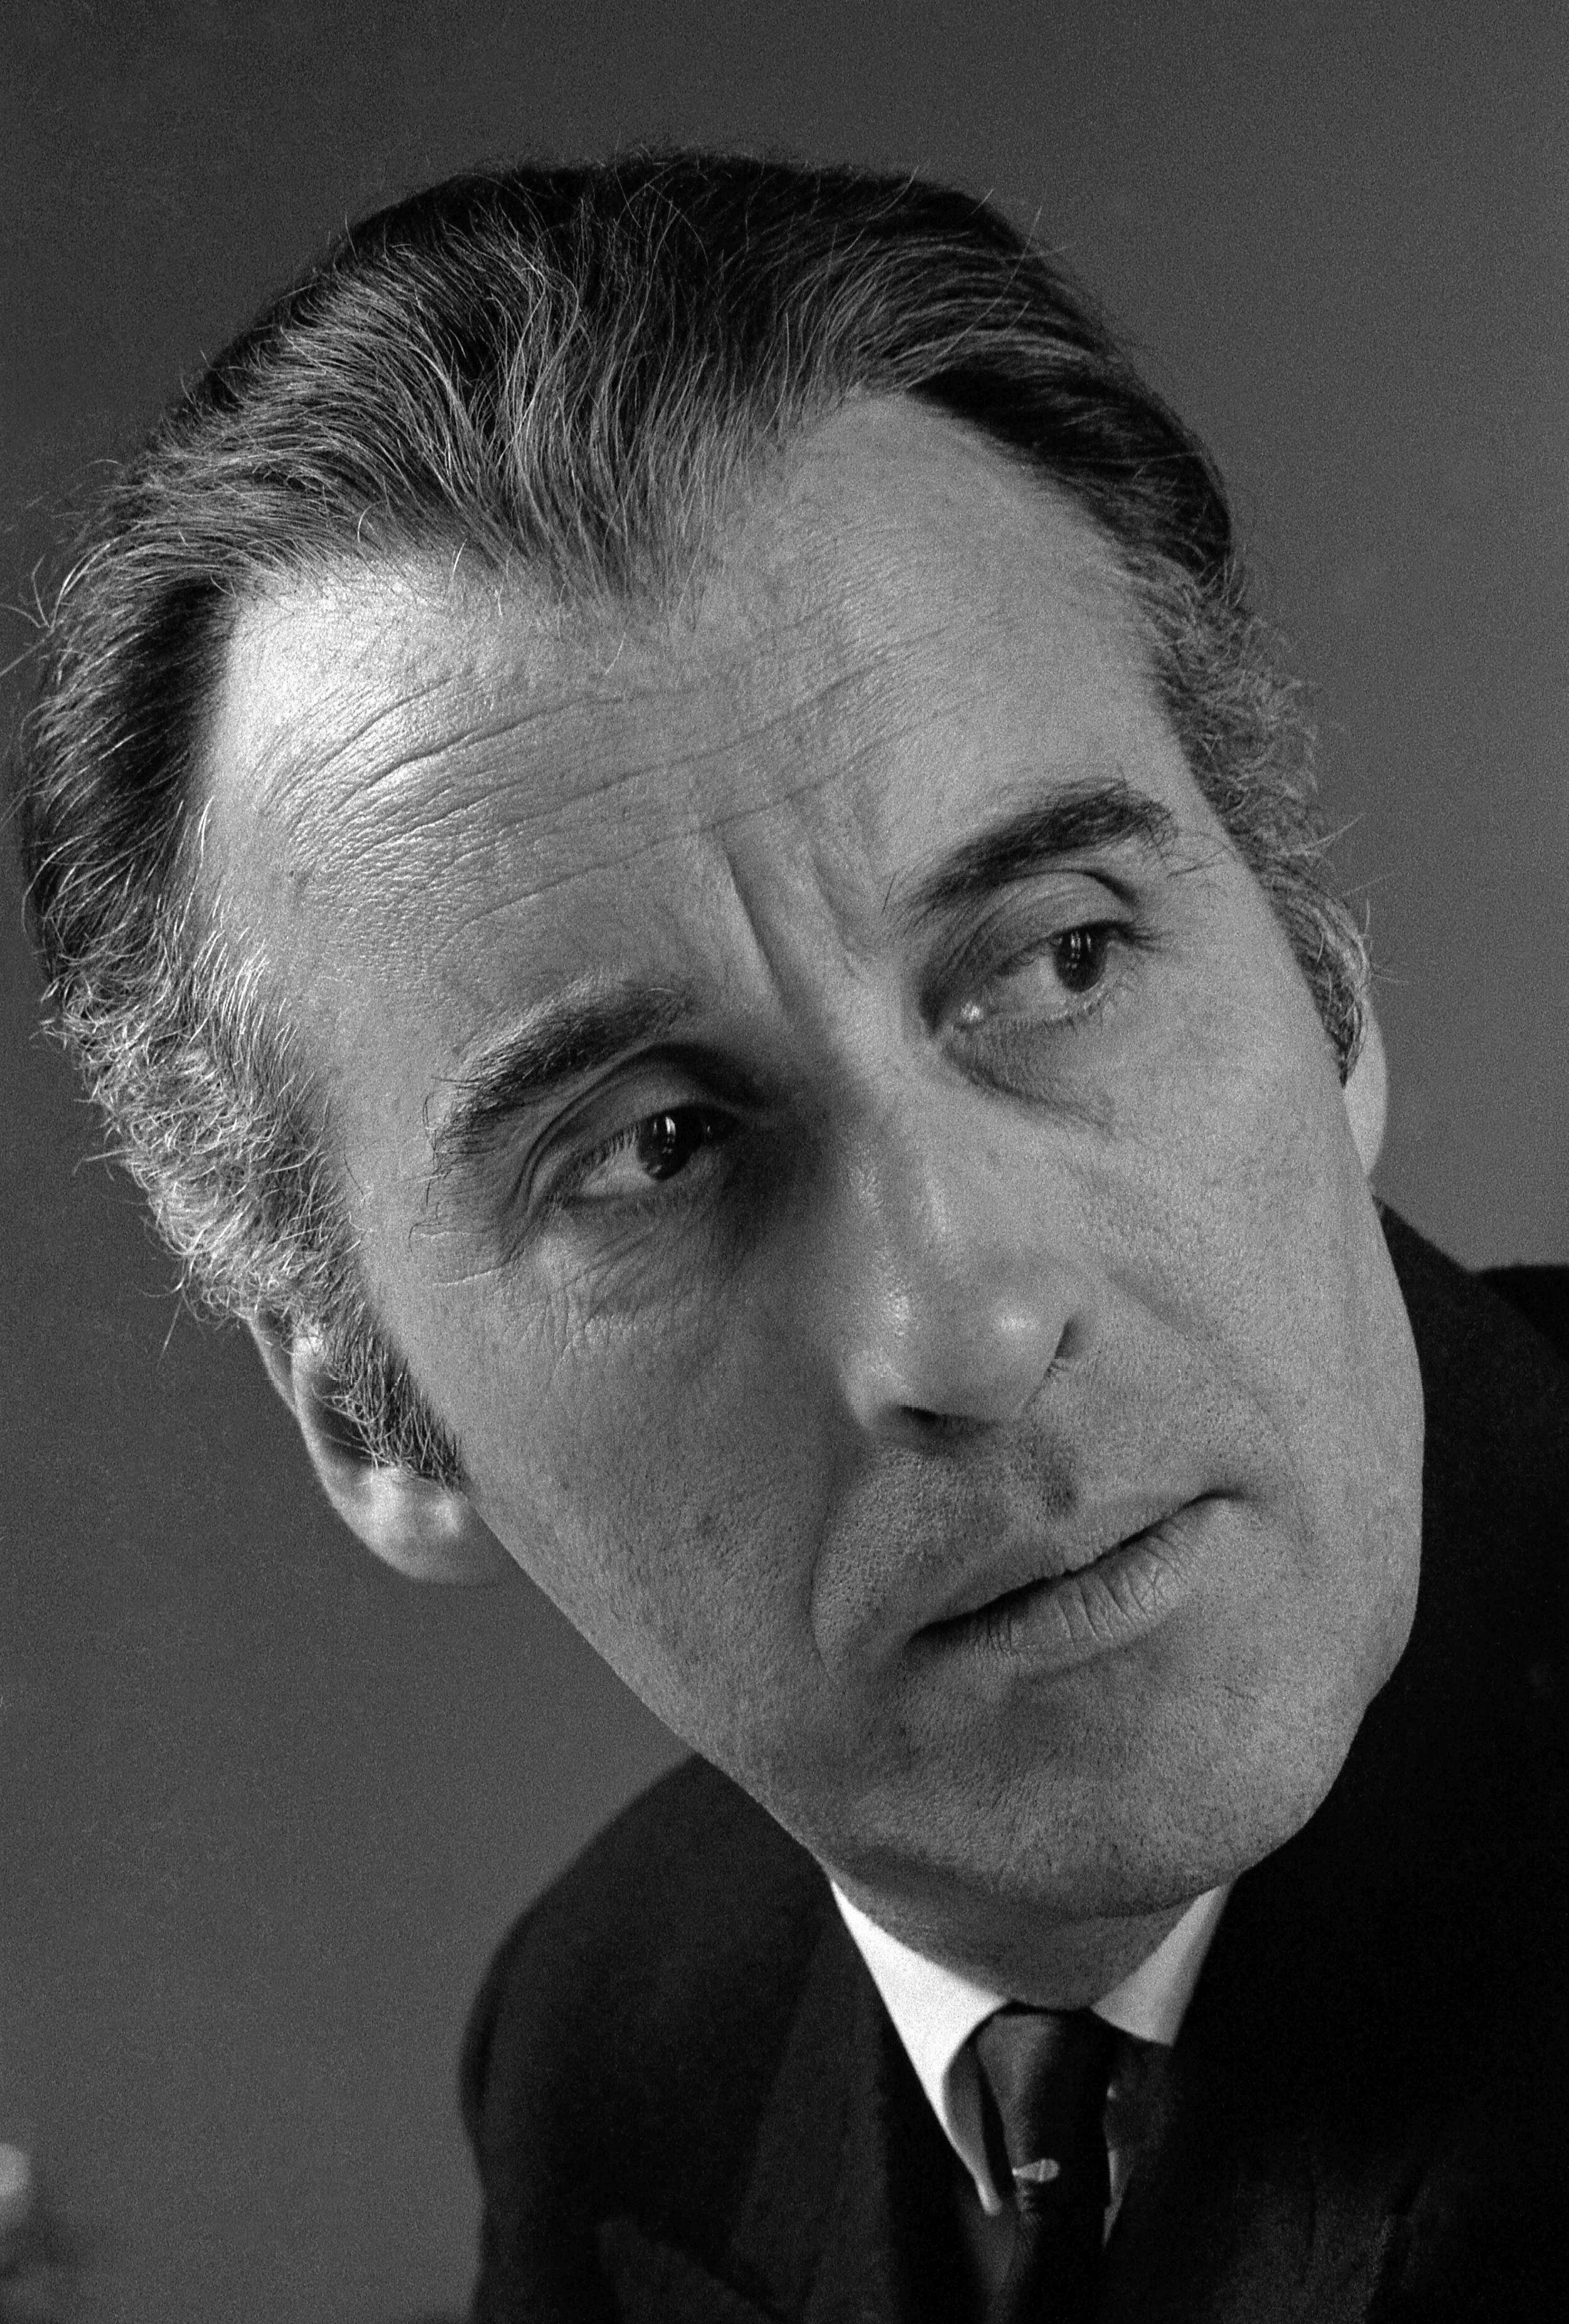 Christopher Lee the actor.